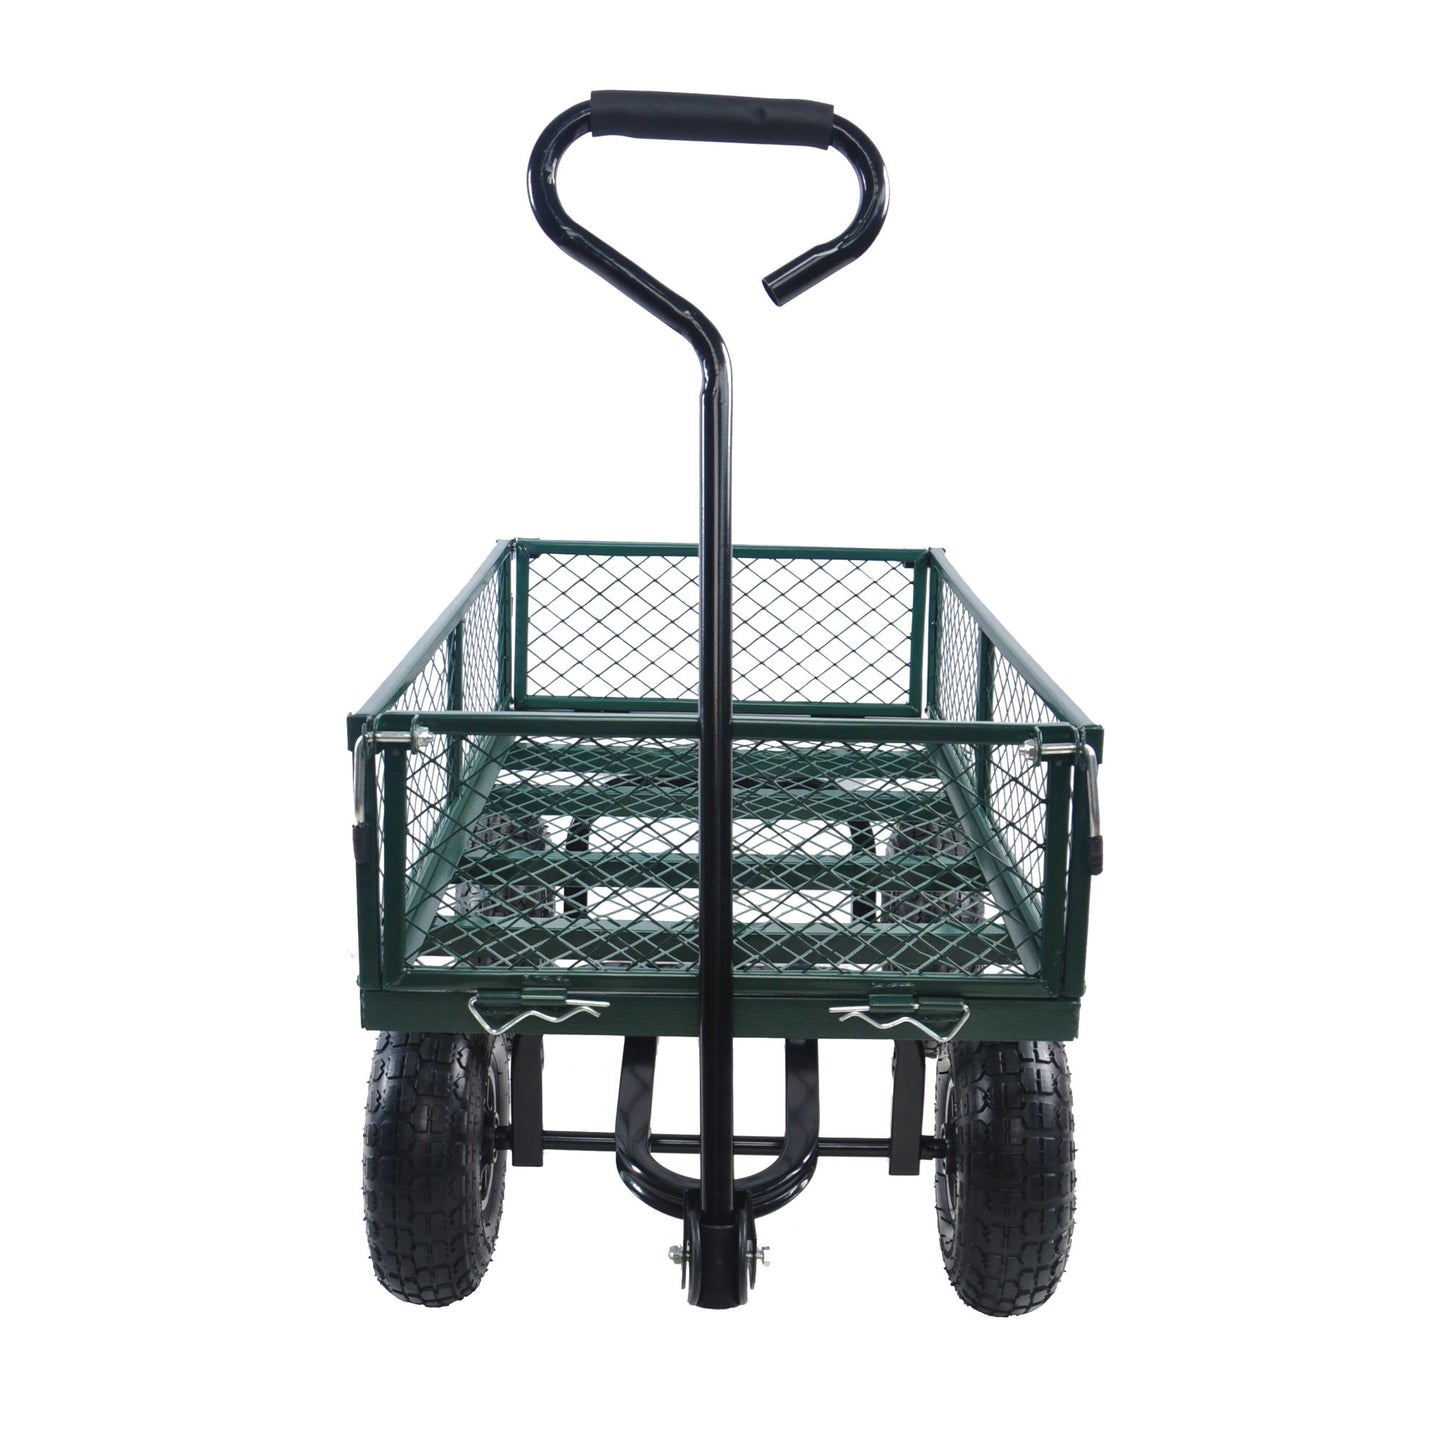 Wagon Garden cart make it easier to transport firewood and other yard work